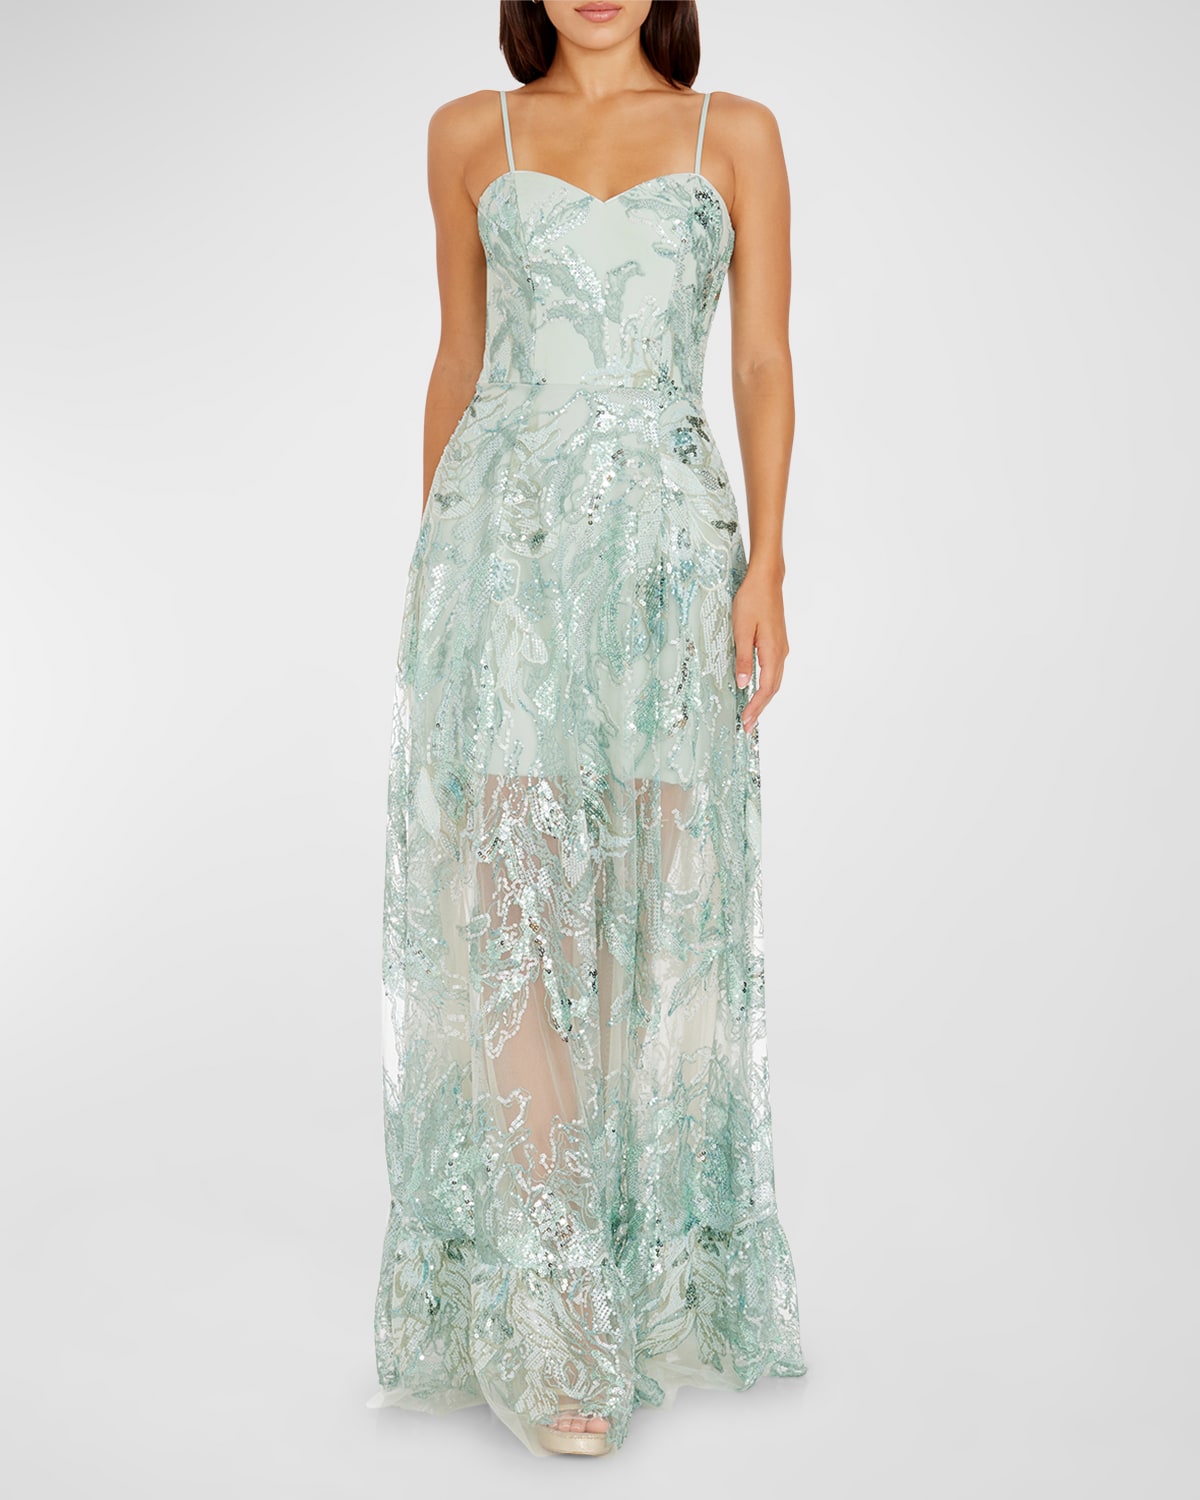 Shop Dress The Population Black Label Anabel Floral Sequin Sweetheart Gown In Mint Multi